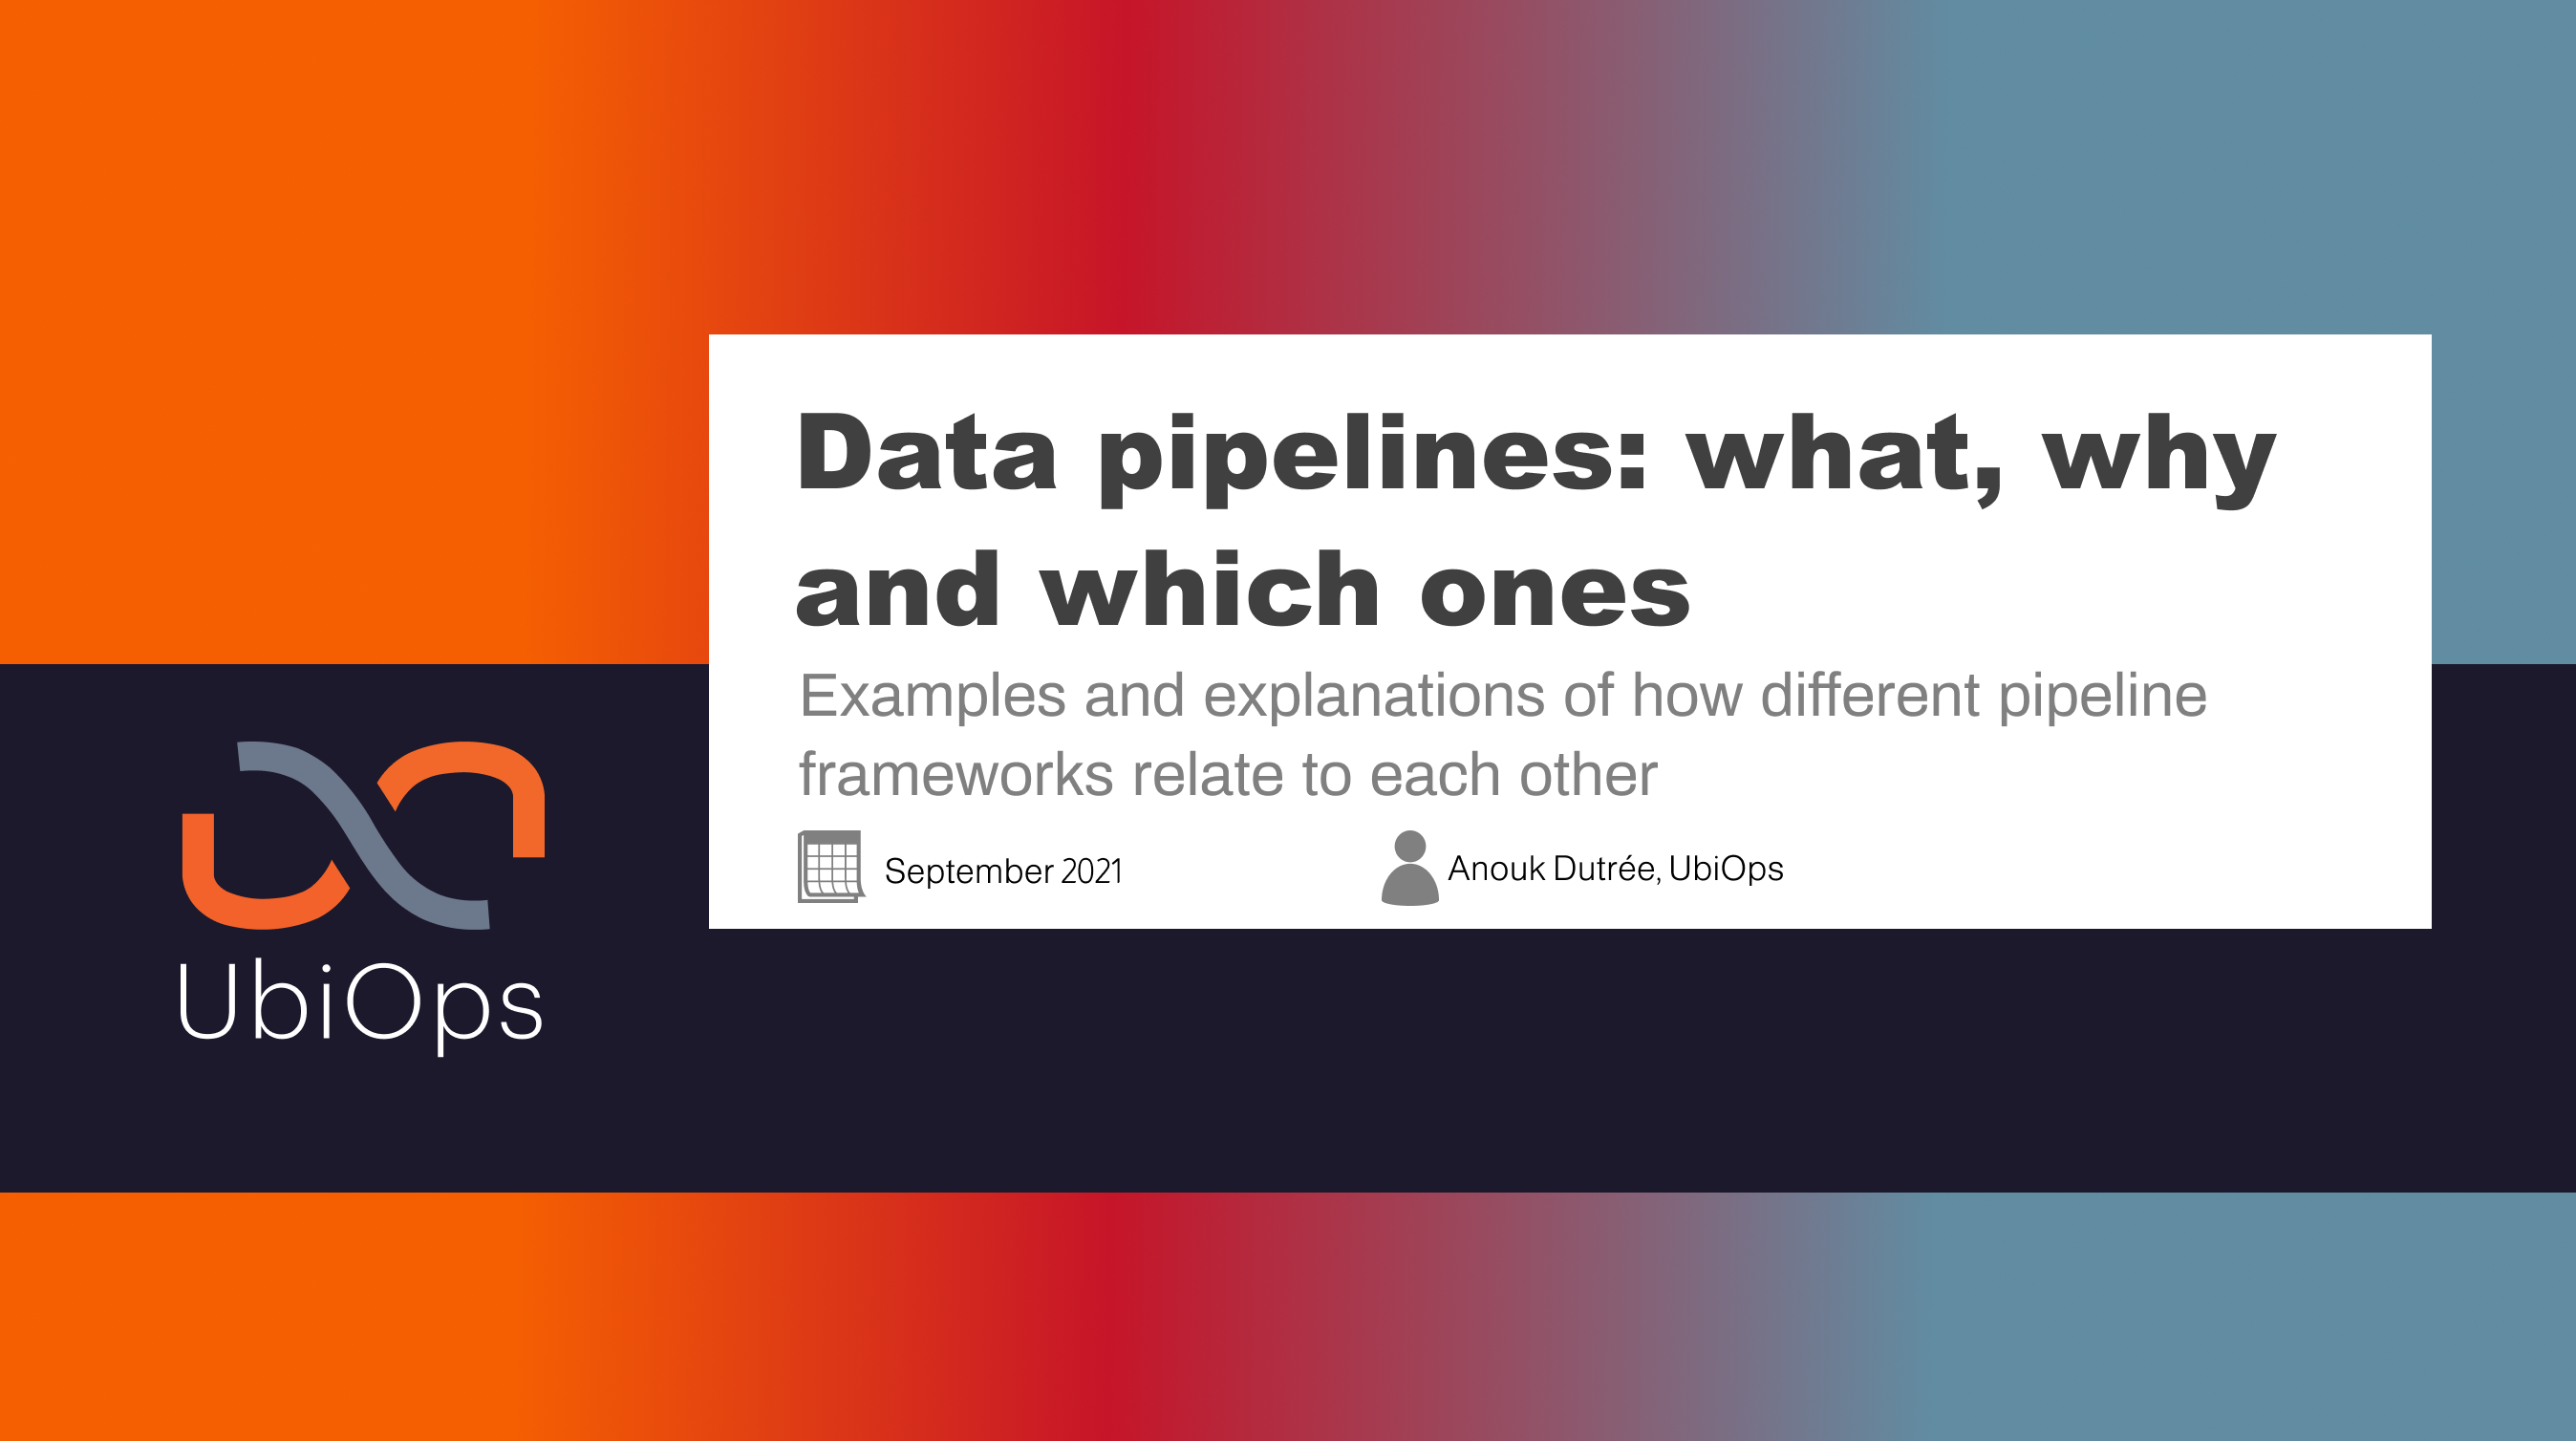 Data pipelines: what, why and which ones